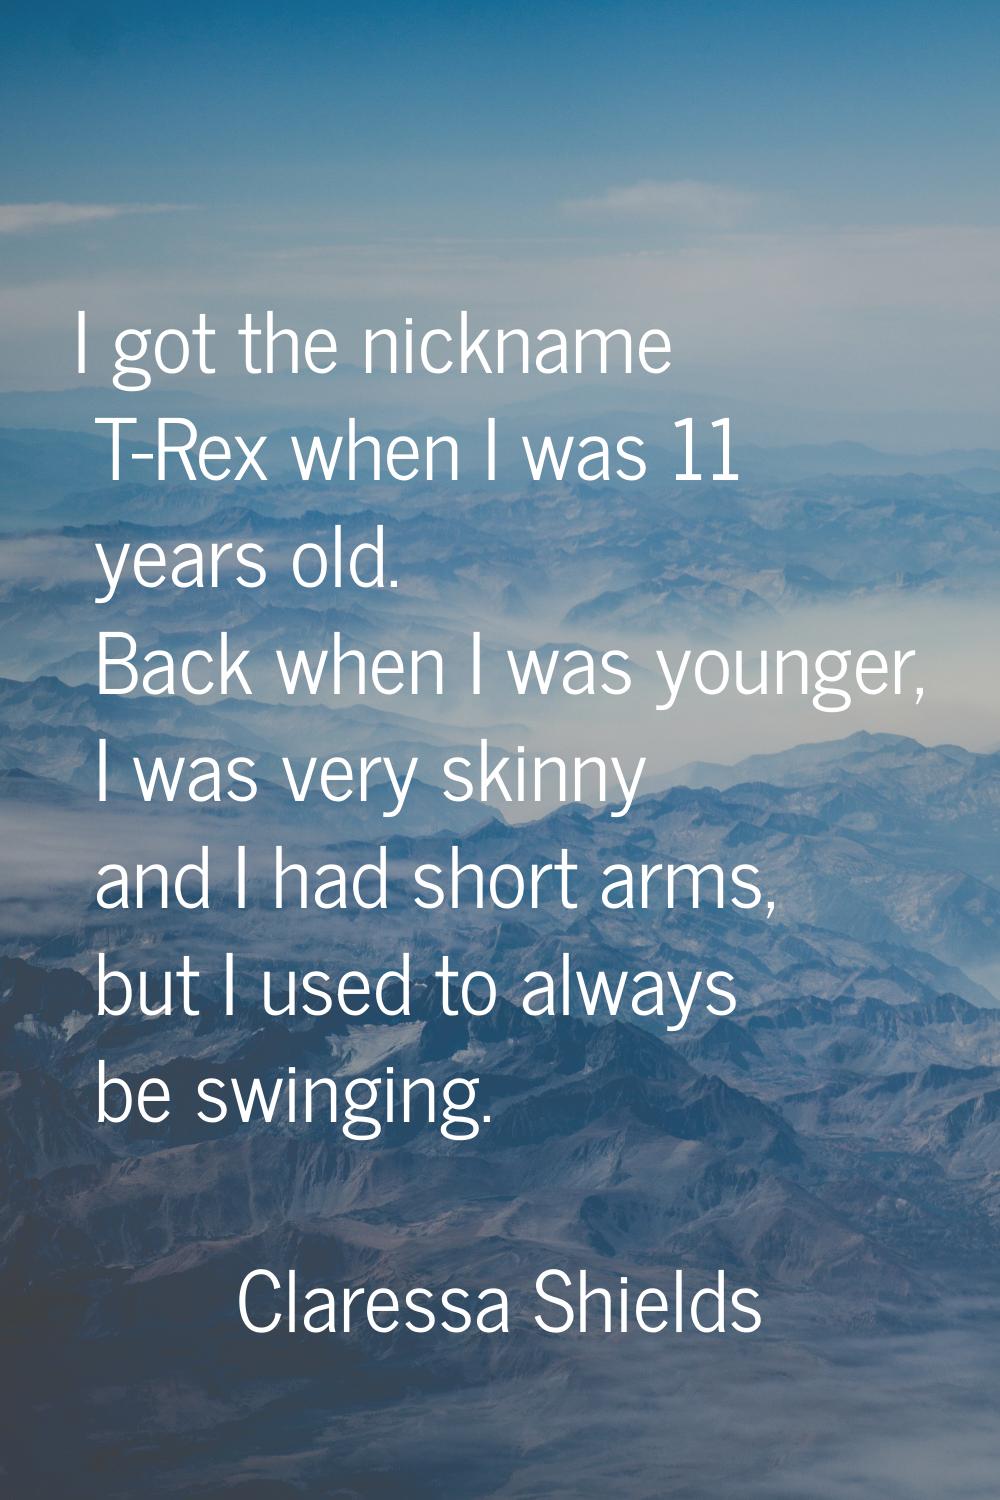 I got the nickname T-Rex when I was 11 years old. Back when I was younger, I was very skinny and I 